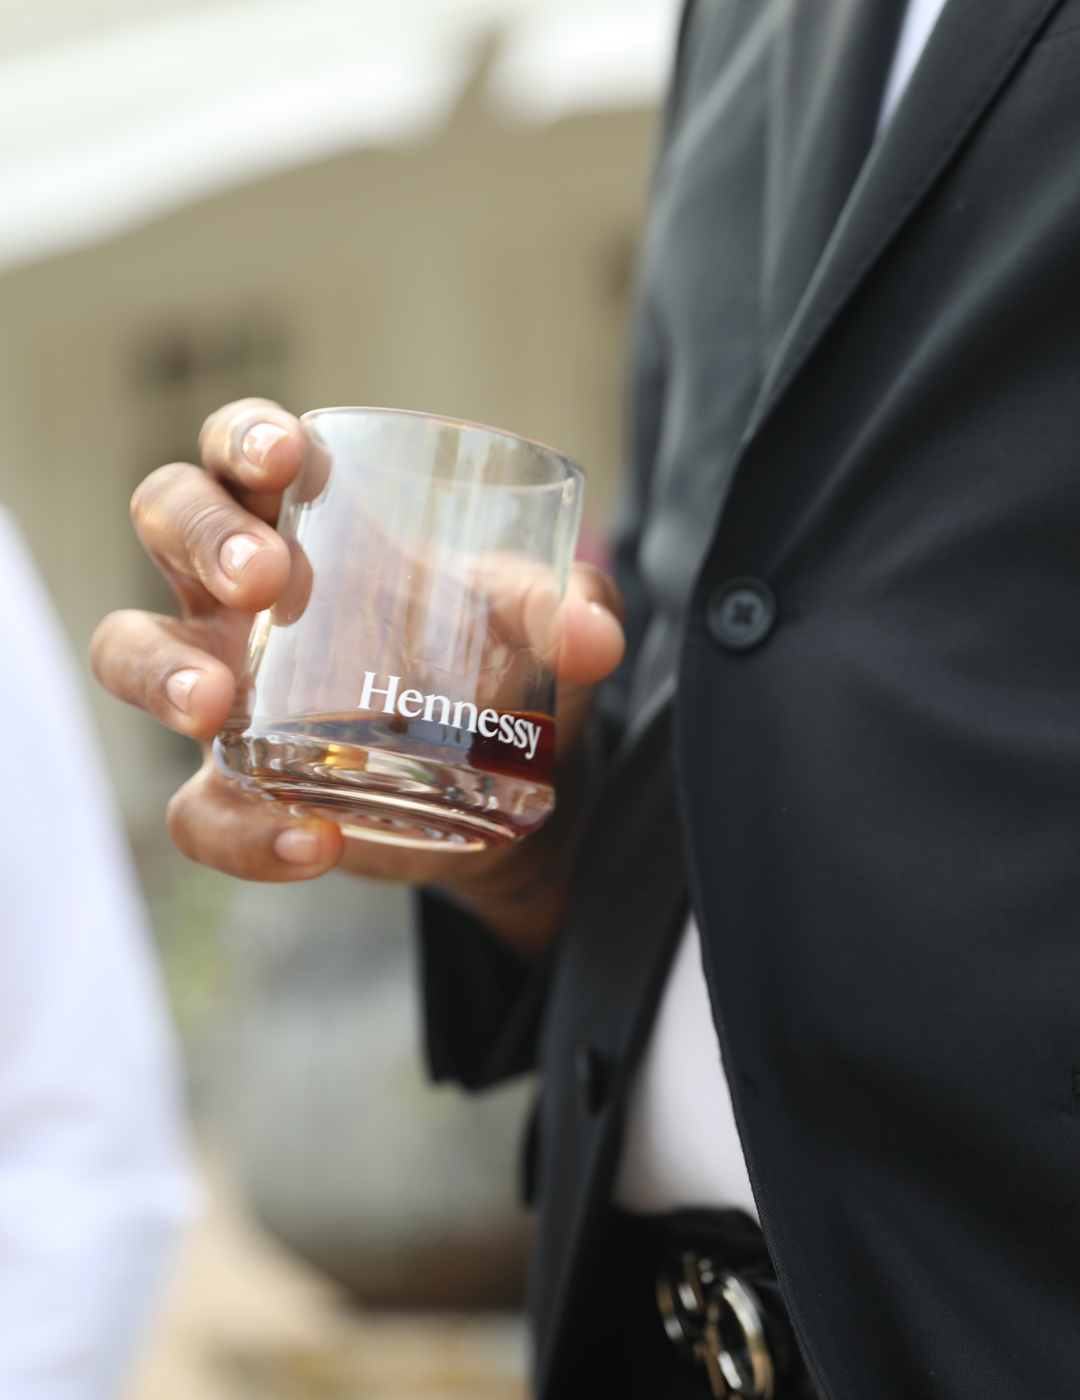 A person holding a glass of Hennessy